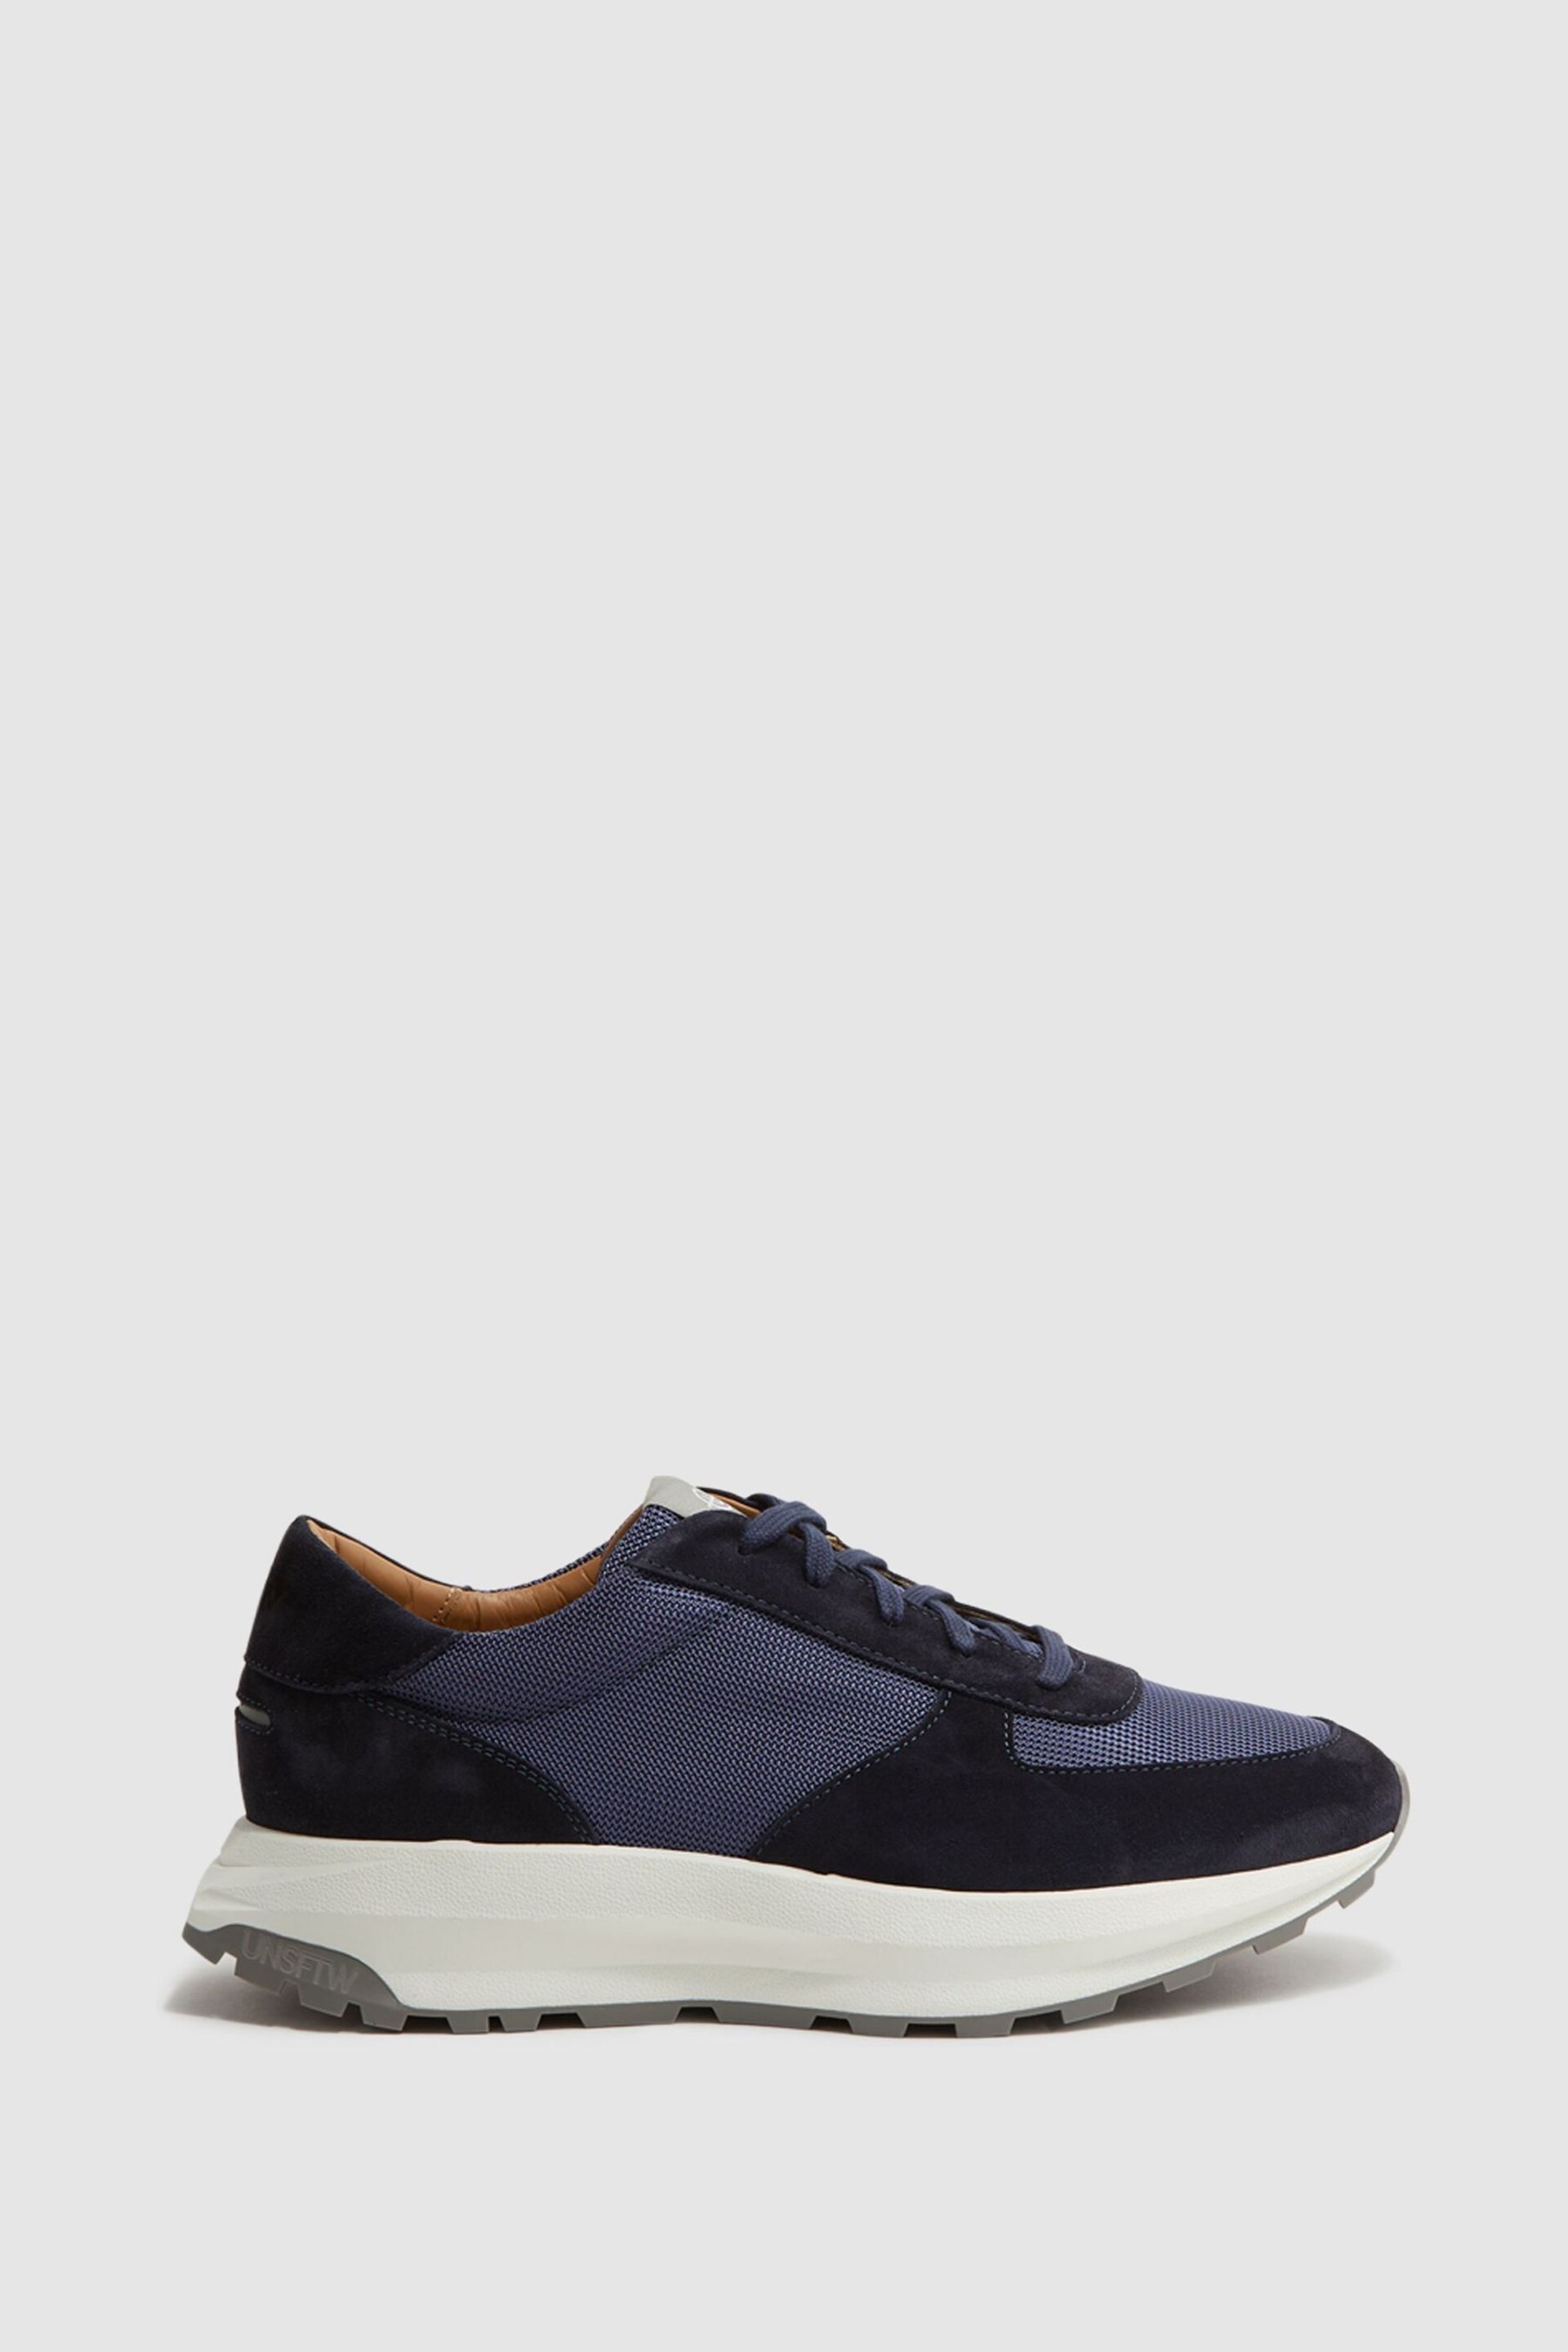 Reiss Blue/Navy Trinity Tech Unseen Trinity Tech Trainers - Image 1 of 8